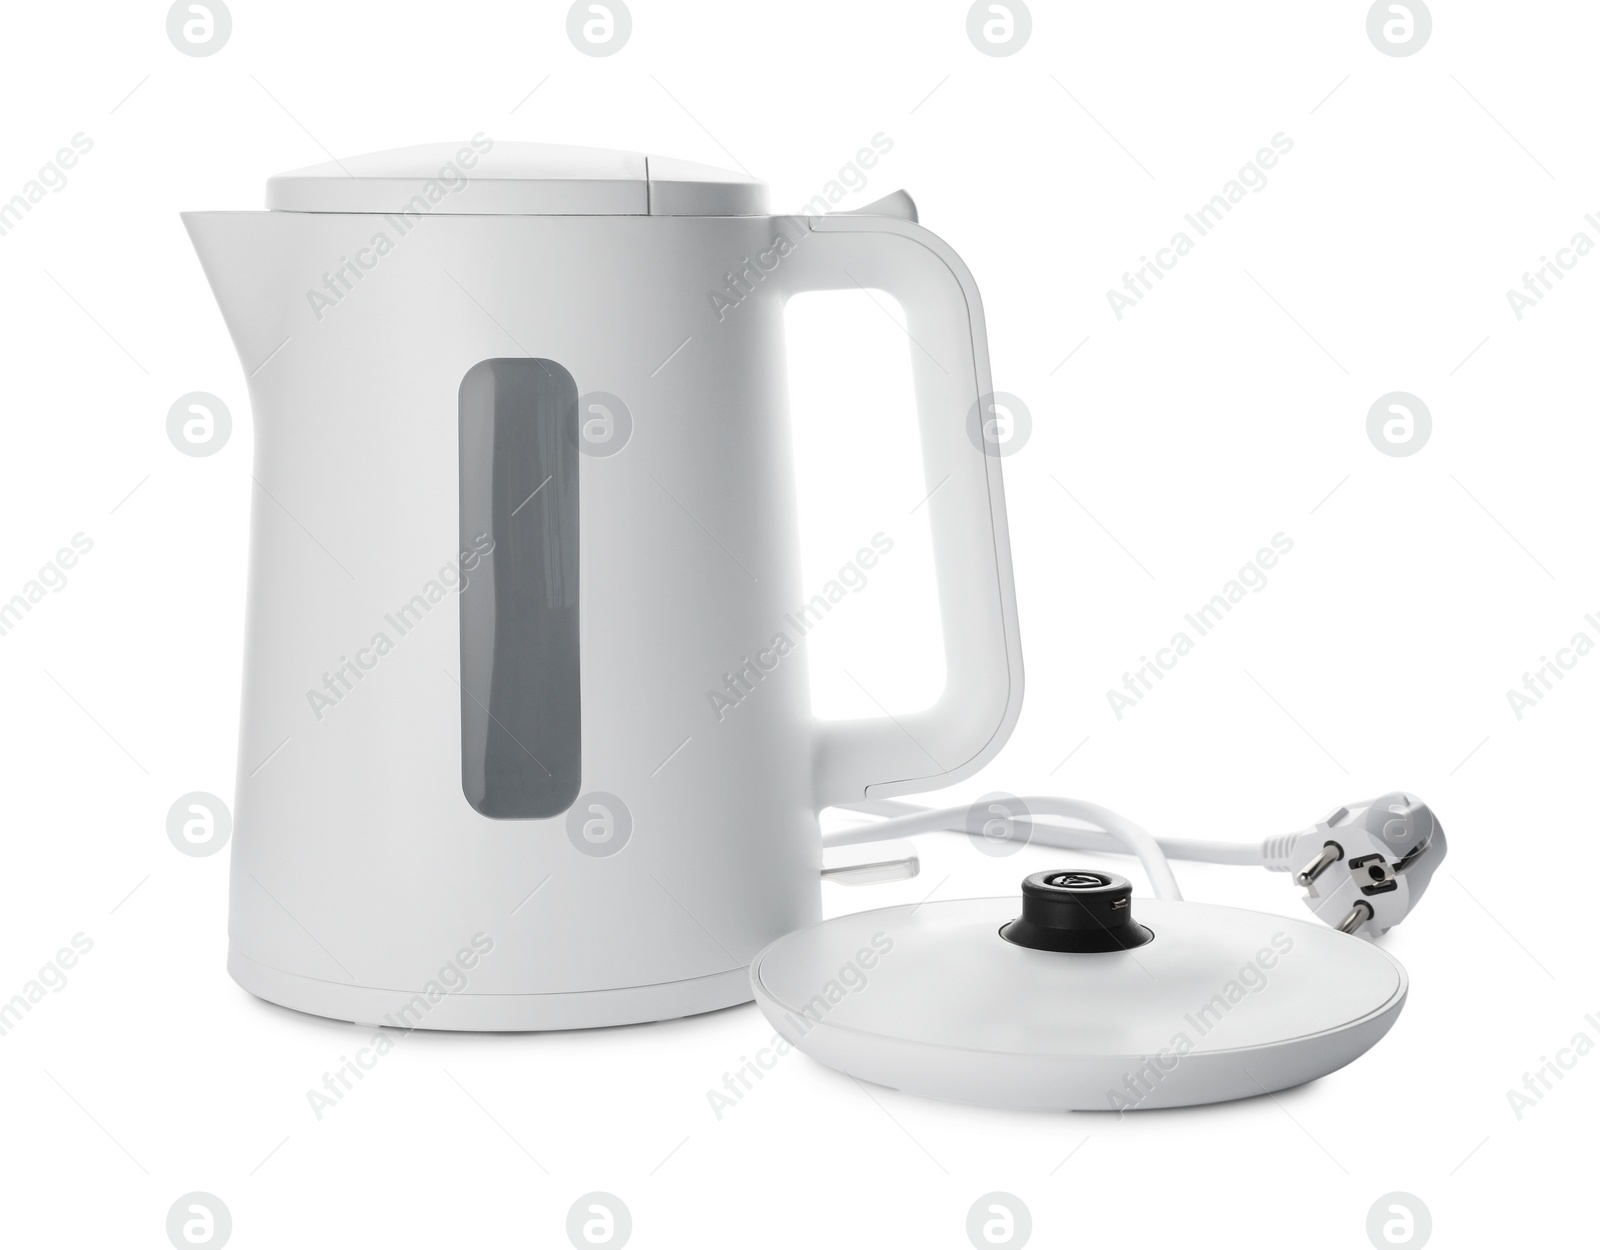 Photo of Modern electric kettle with base and plug isolated on white